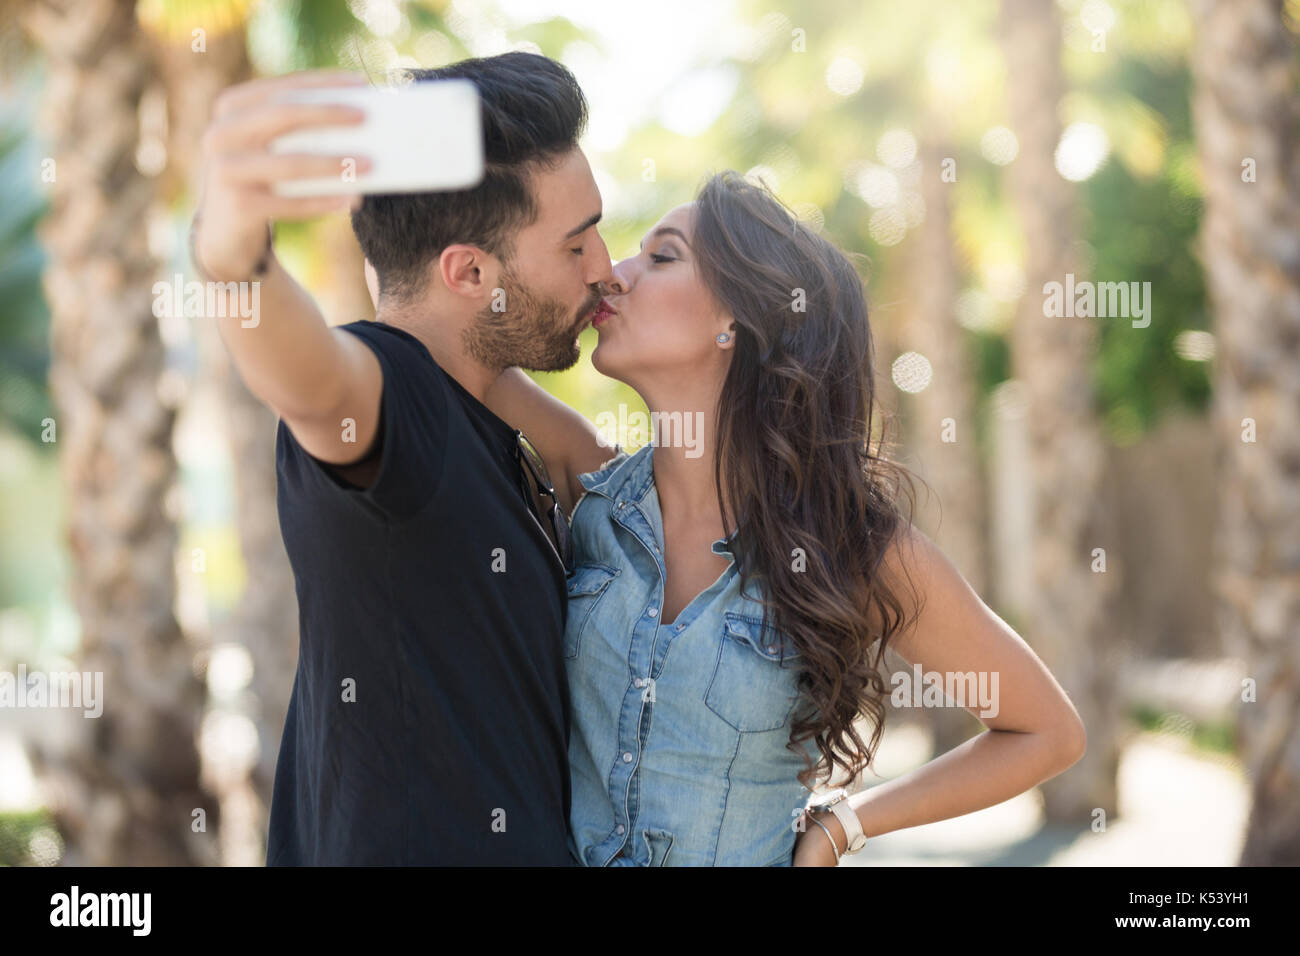 Young Attractive African American Couple Pose for Selfie Pose with Smart  Phone Stock Photo - Image of caucasian, lifestyle: 109855292